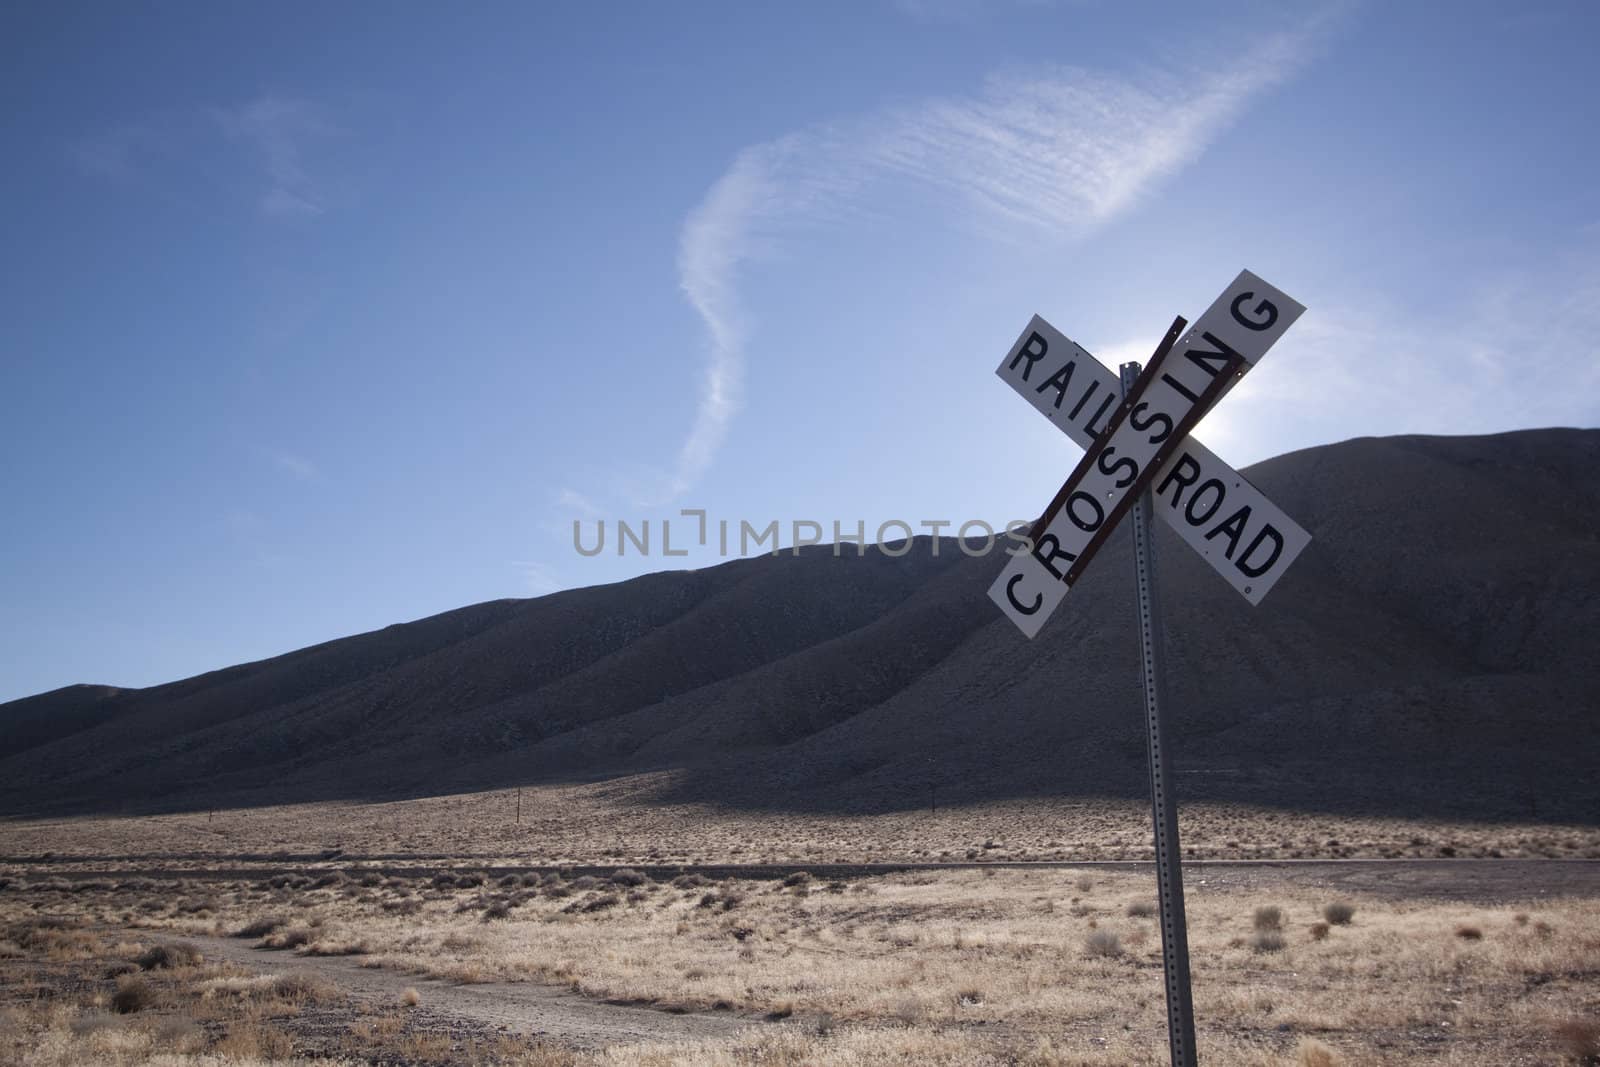 Railroad crossing tracks in the desert by jeremywhat